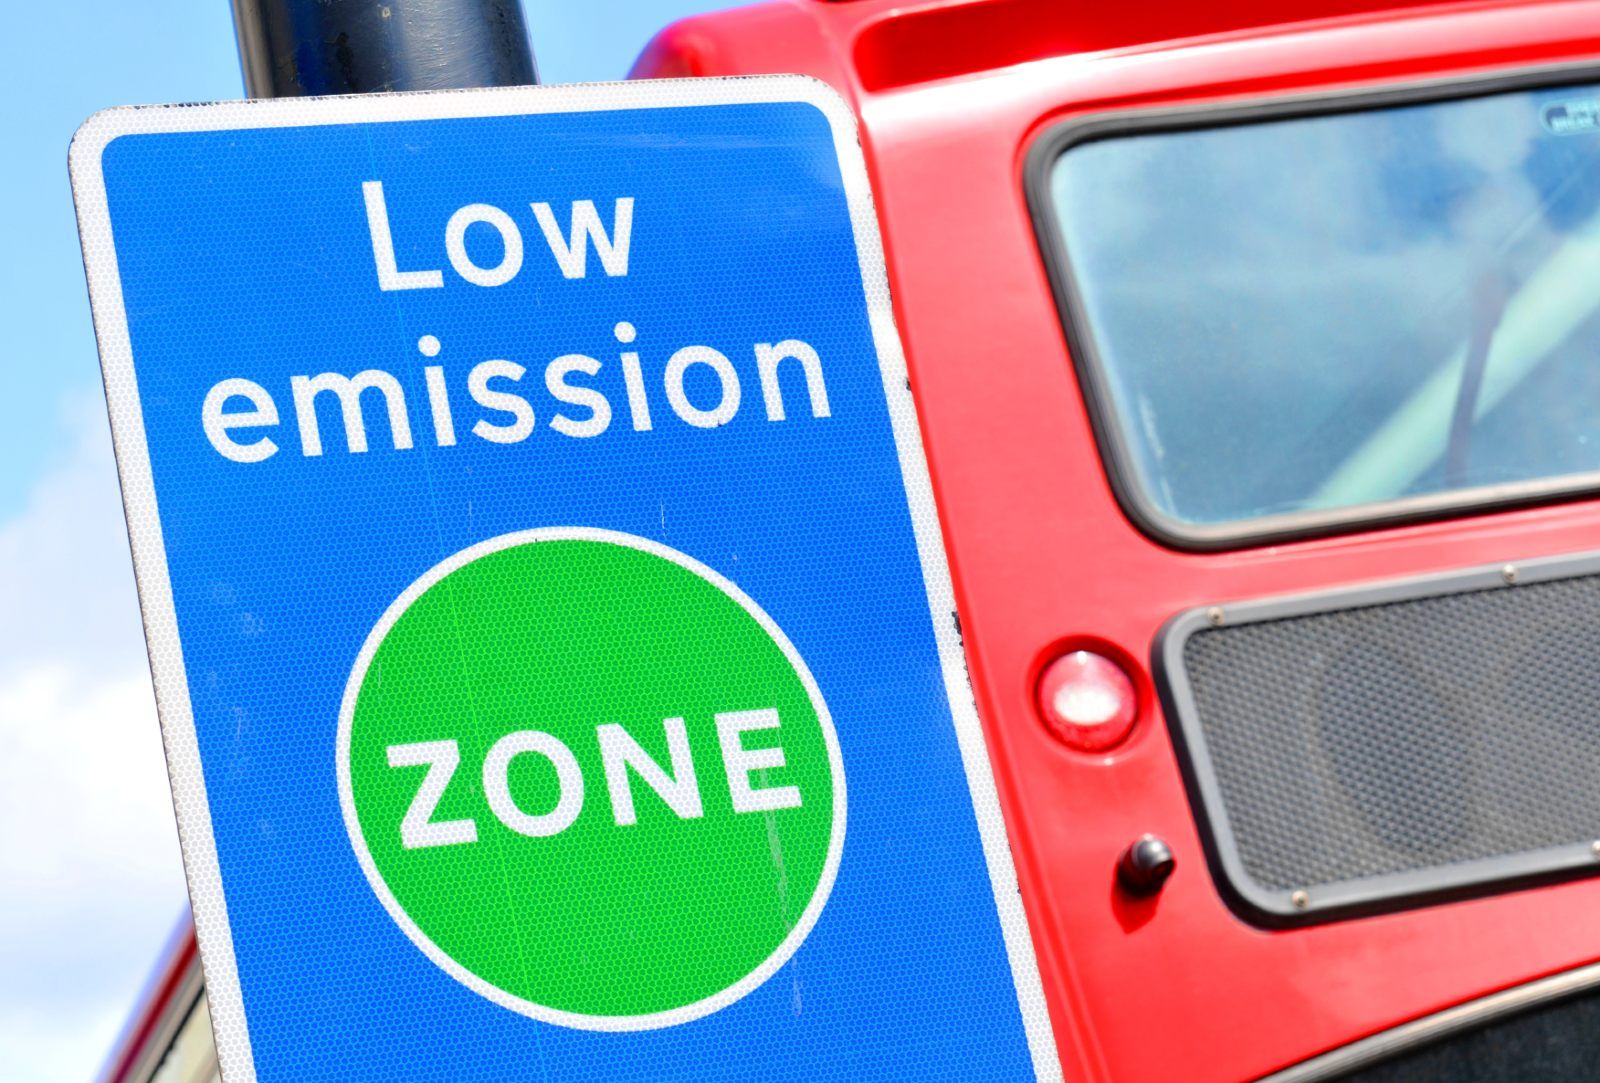 Blue-and-green sign reads "Low emission zone" - emission restrictions